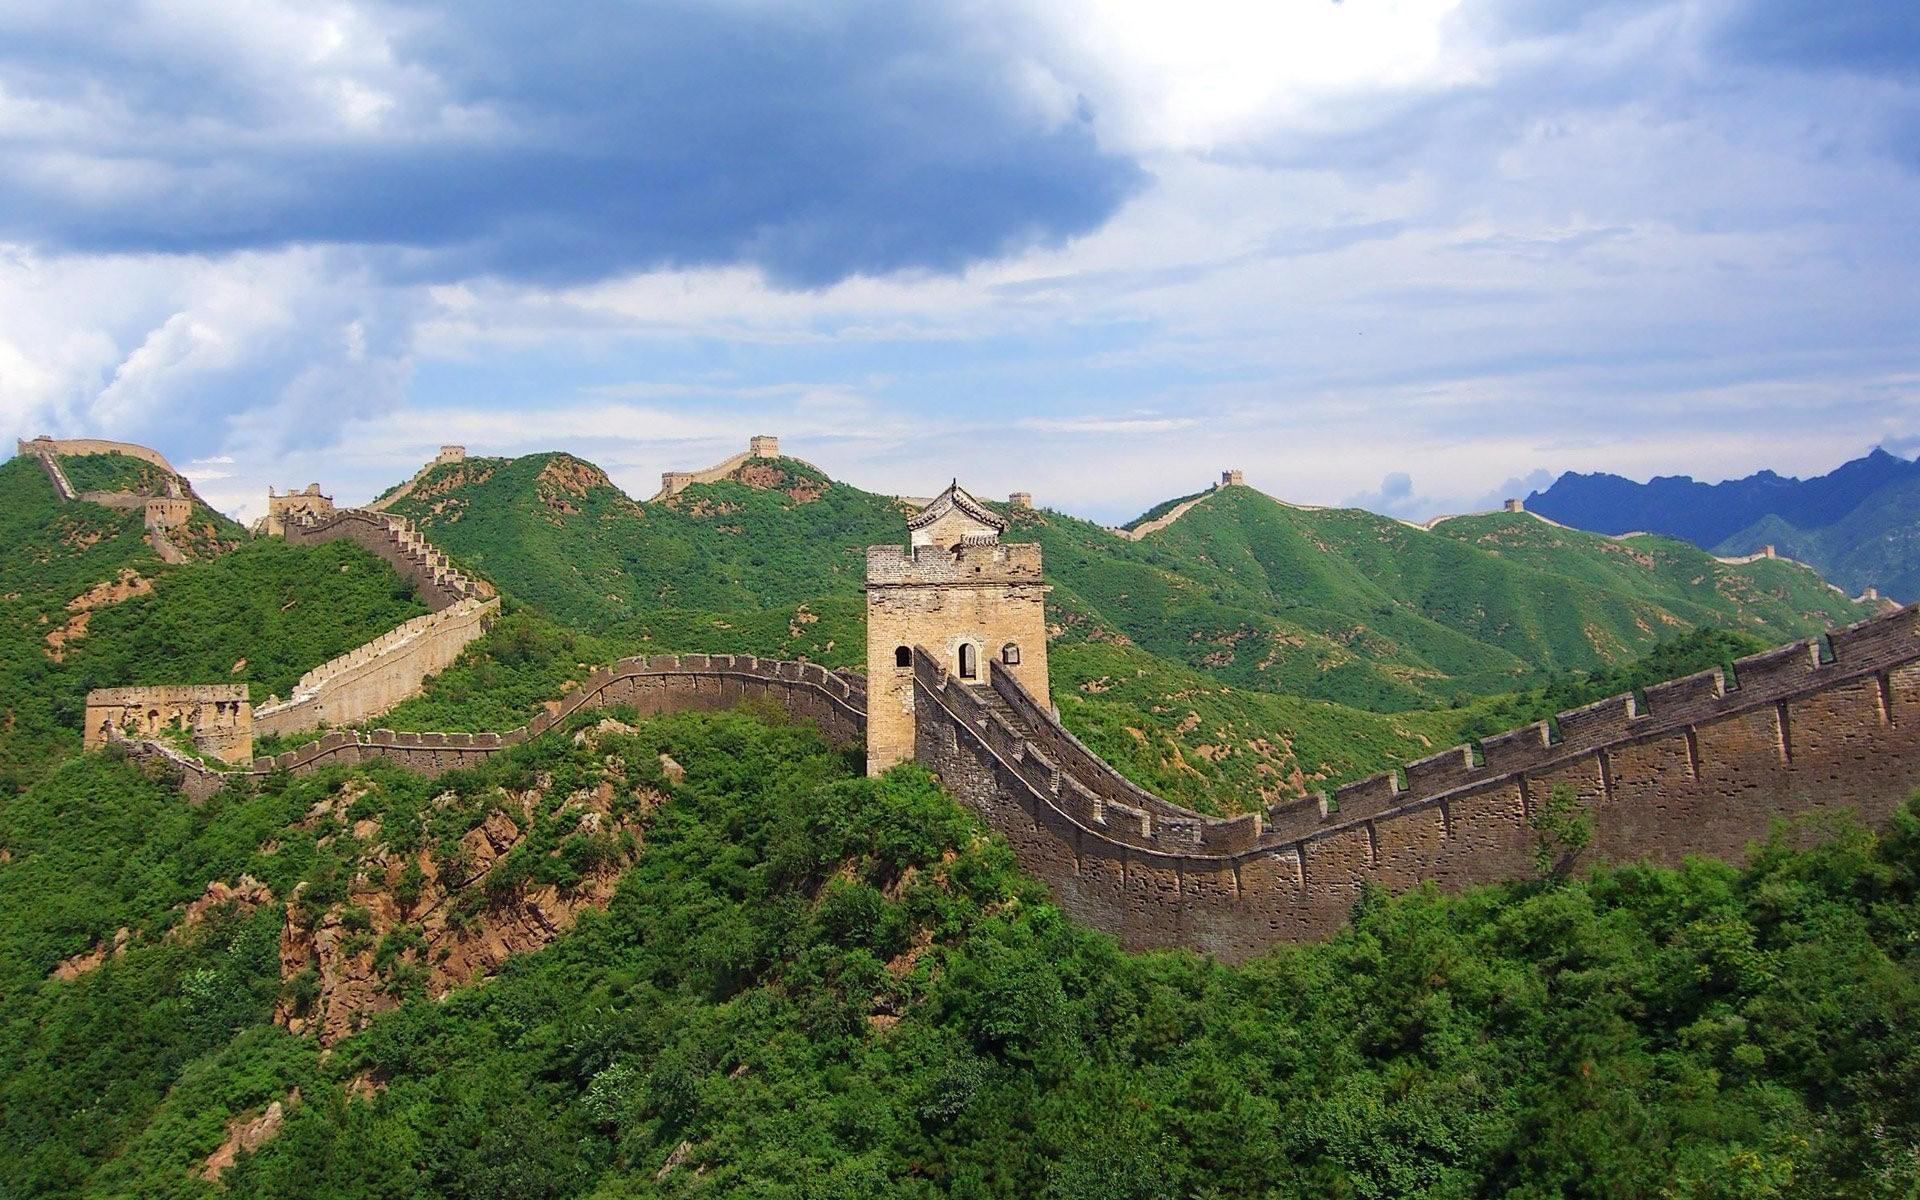 Wallpaper of The Great Wall of China